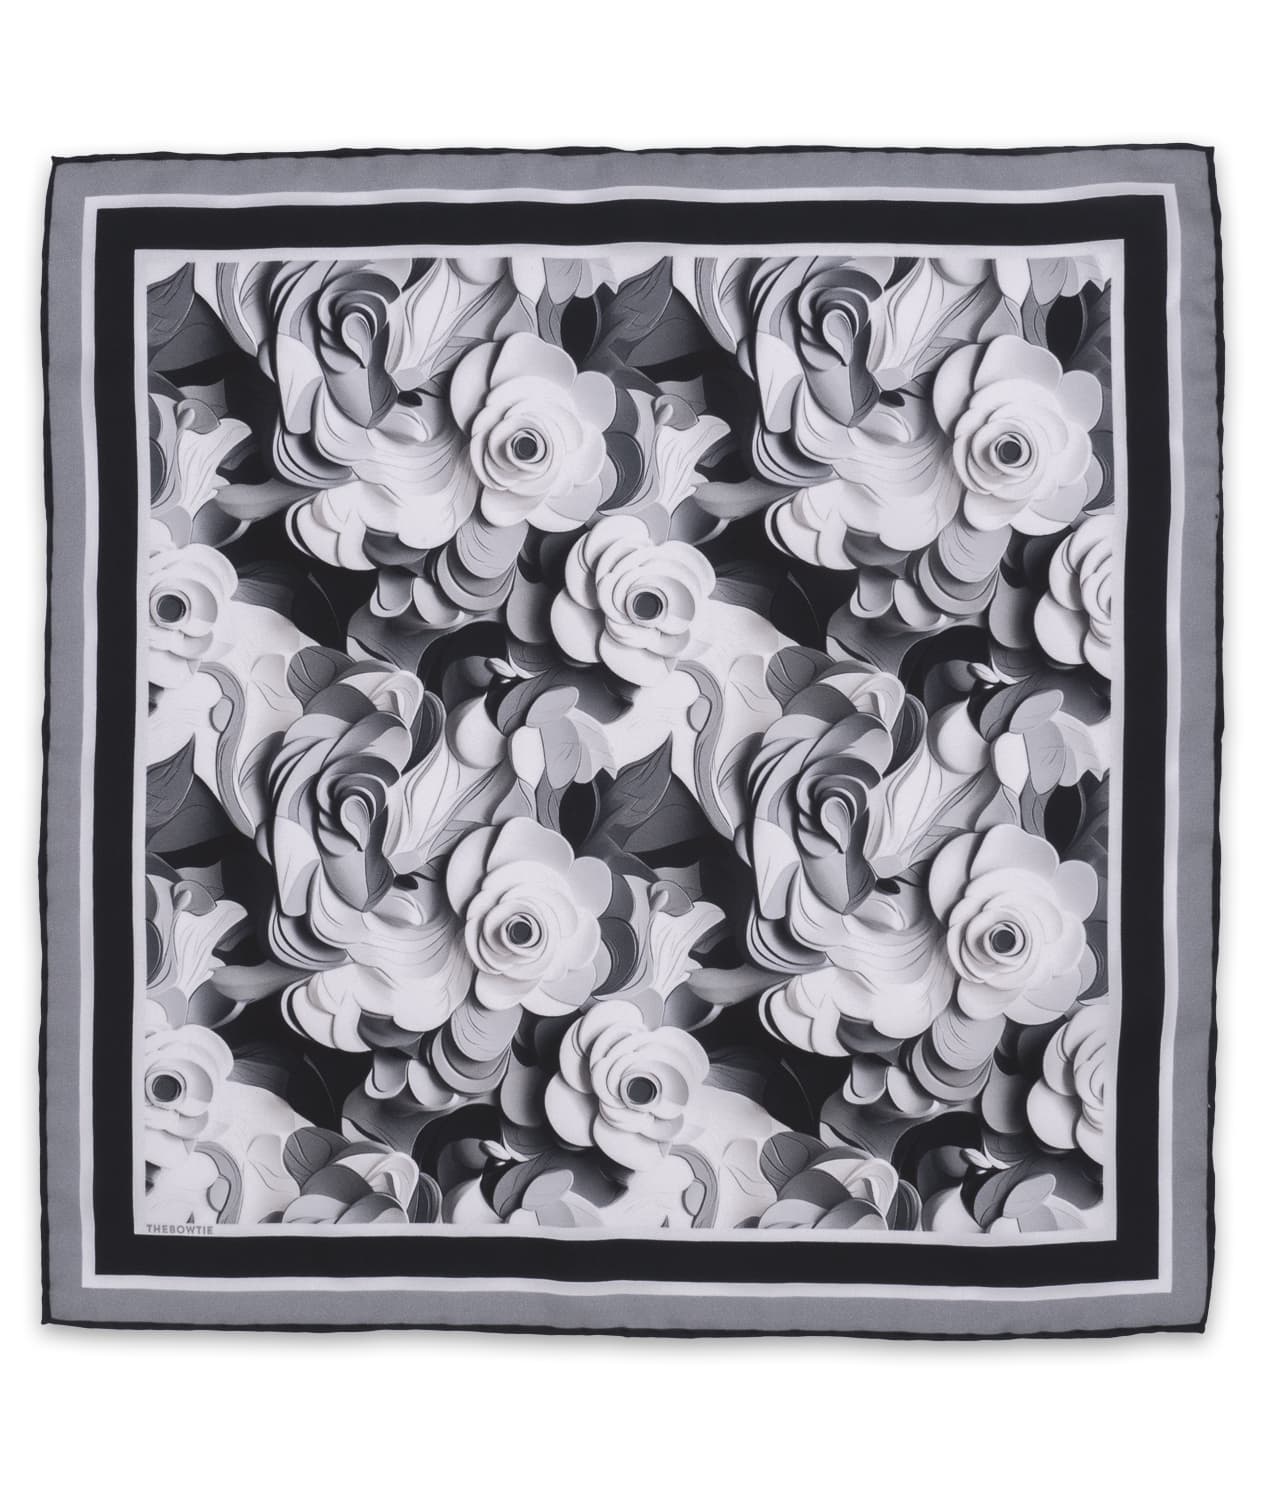 Black/ White 100% Silk Twill Pocket Square With Abstract Floral Design